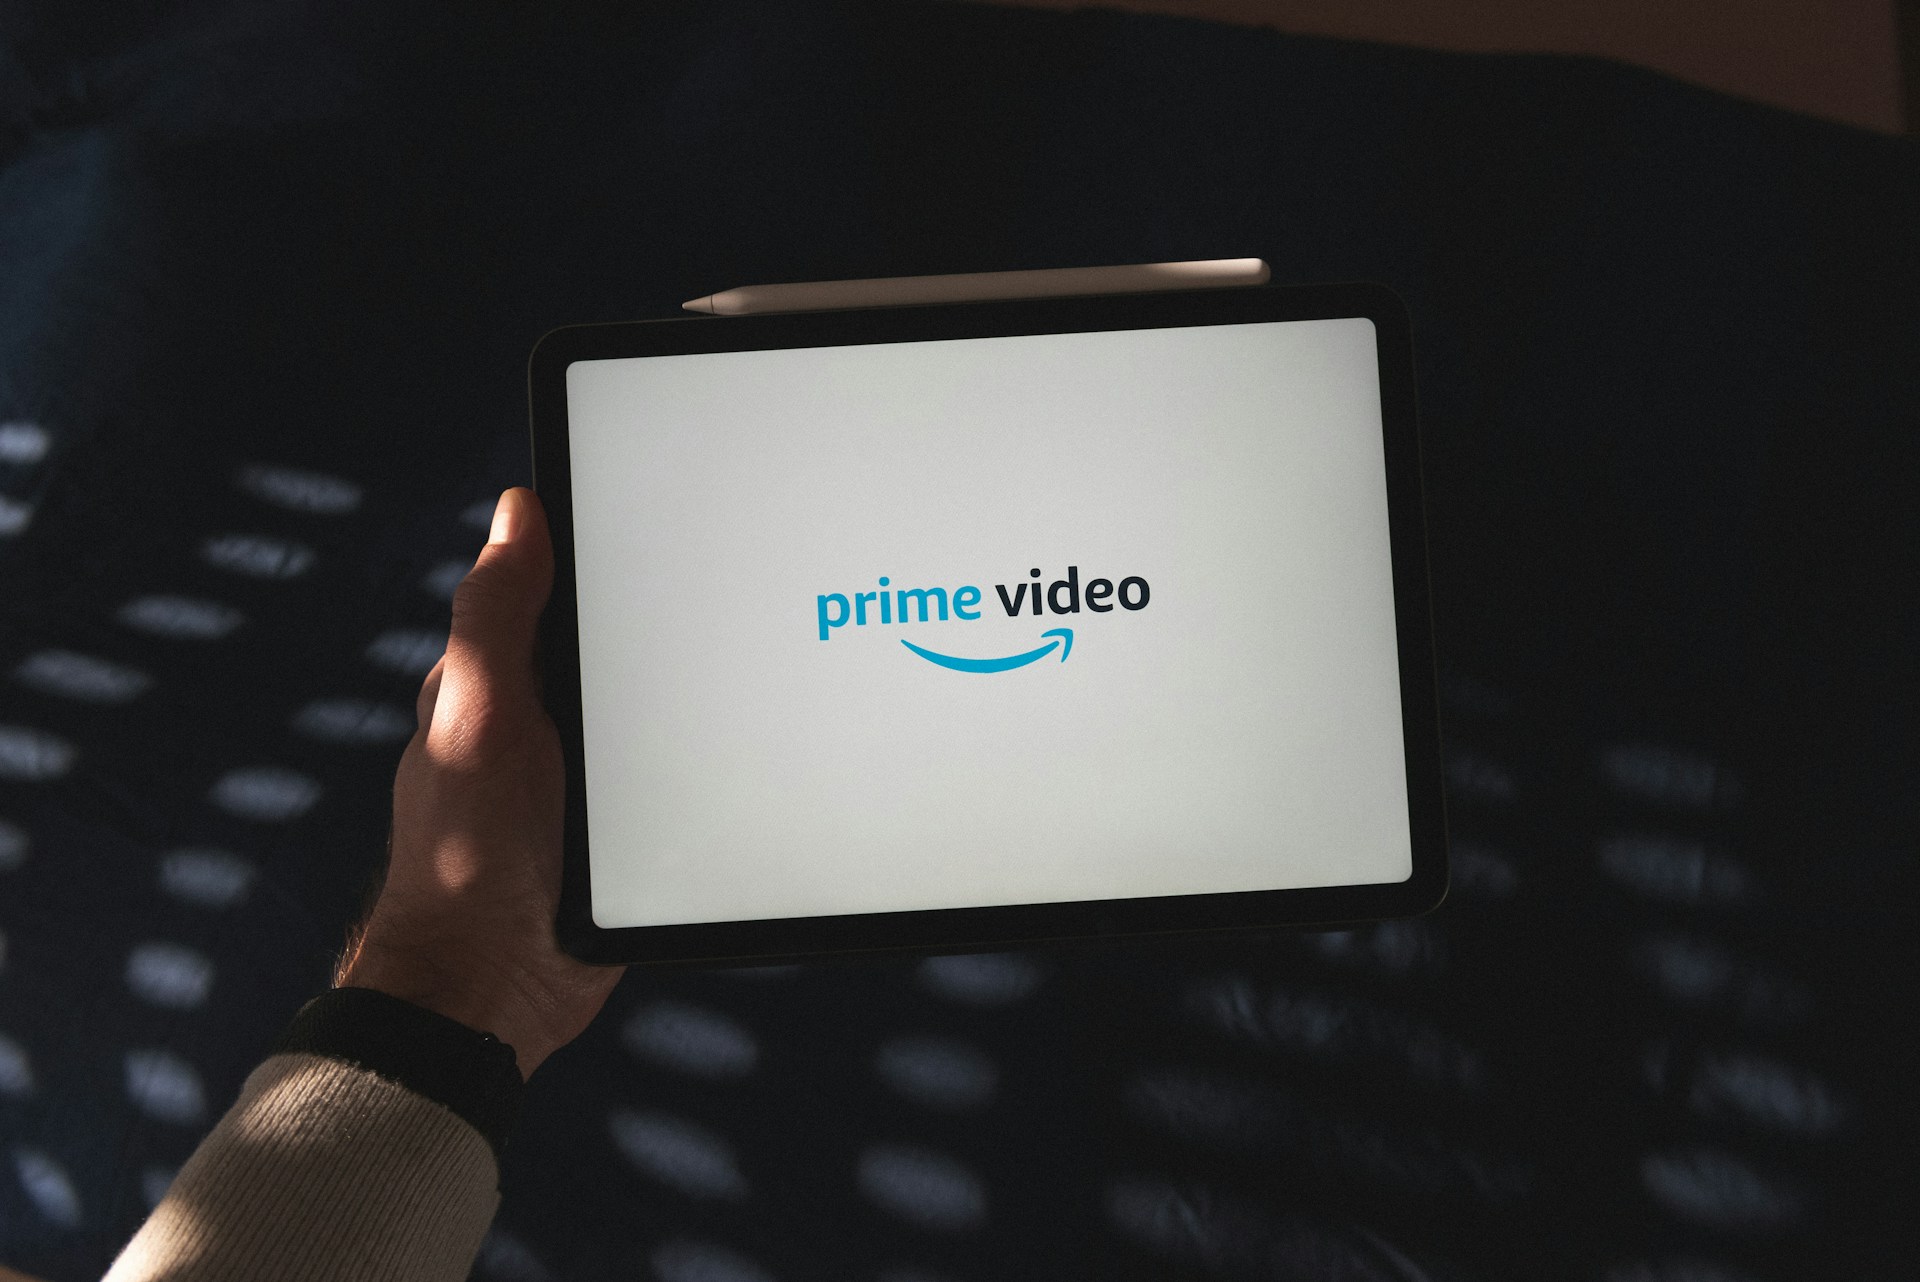 Amazon today launches Prime Video ads